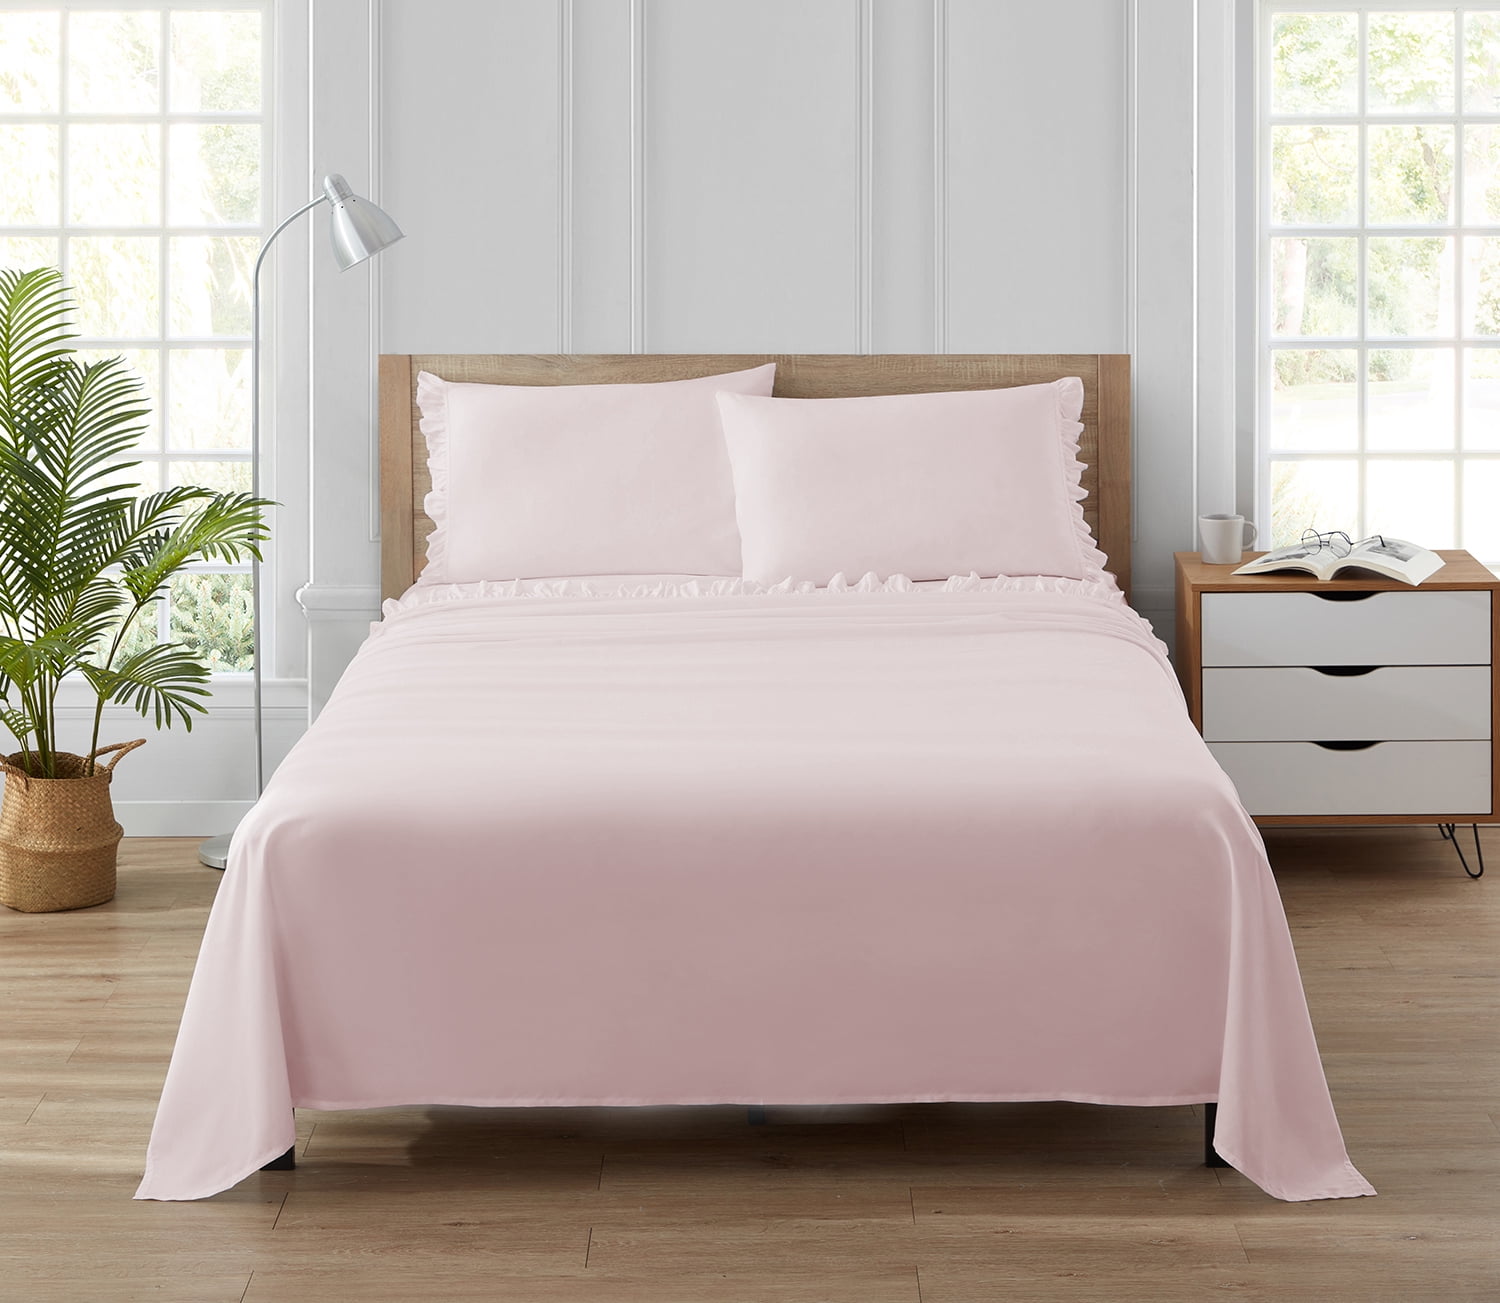 Simply Shabby Chic Solid Ruffle 4-Piece Pink Soft Washed Microfiber Bed  Sheet Set, Full